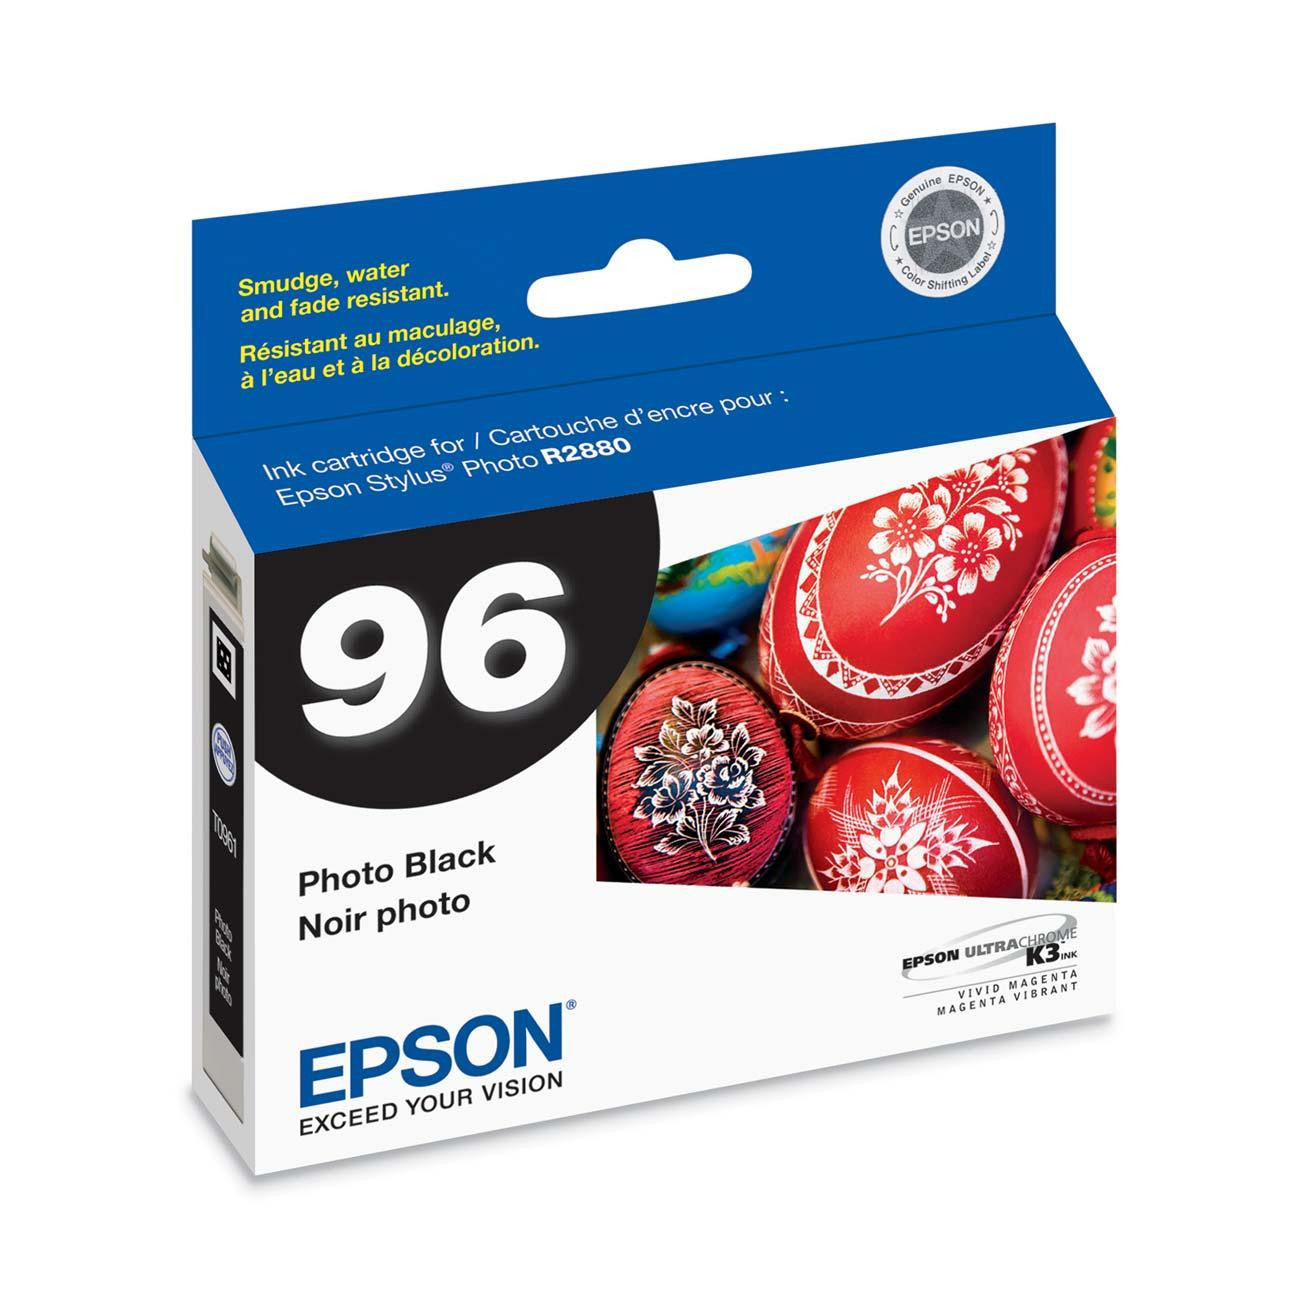 Epson T096120 R2880 Photo Black Ink Cartridge (96), printers ink small format, Epson - Pictureline 